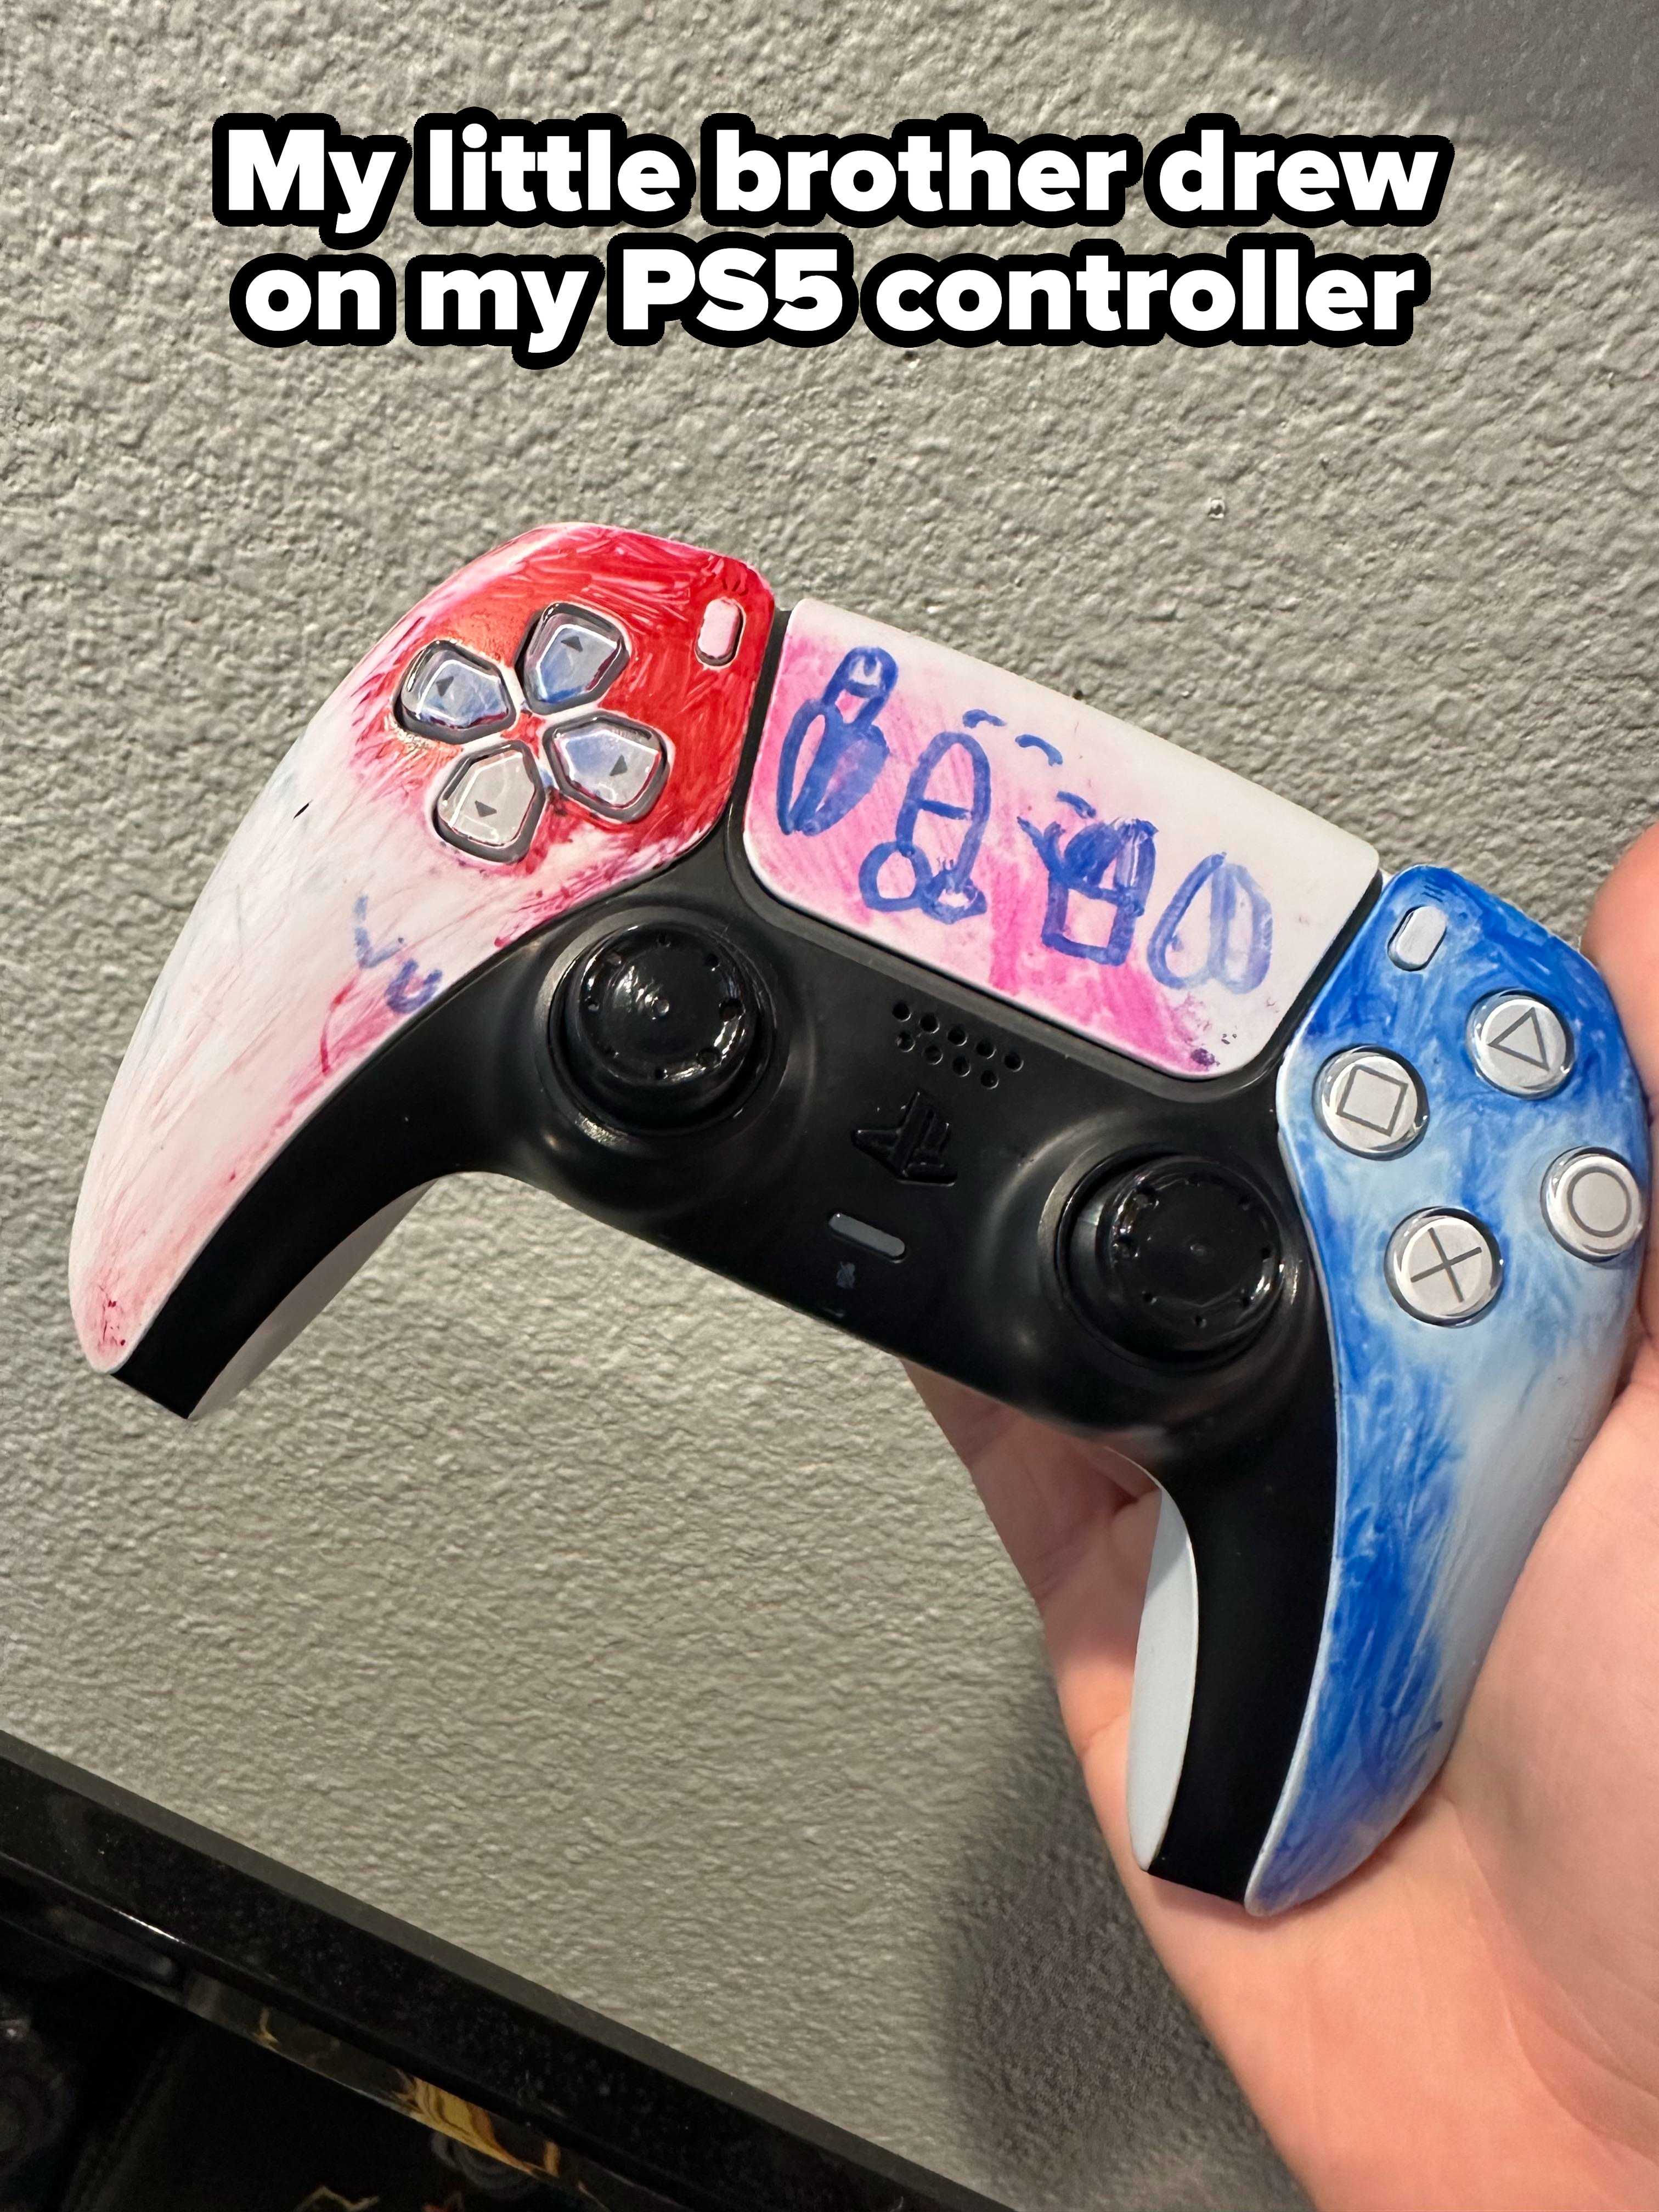 &quot;My little brother drew on my PS5 controller&quot;